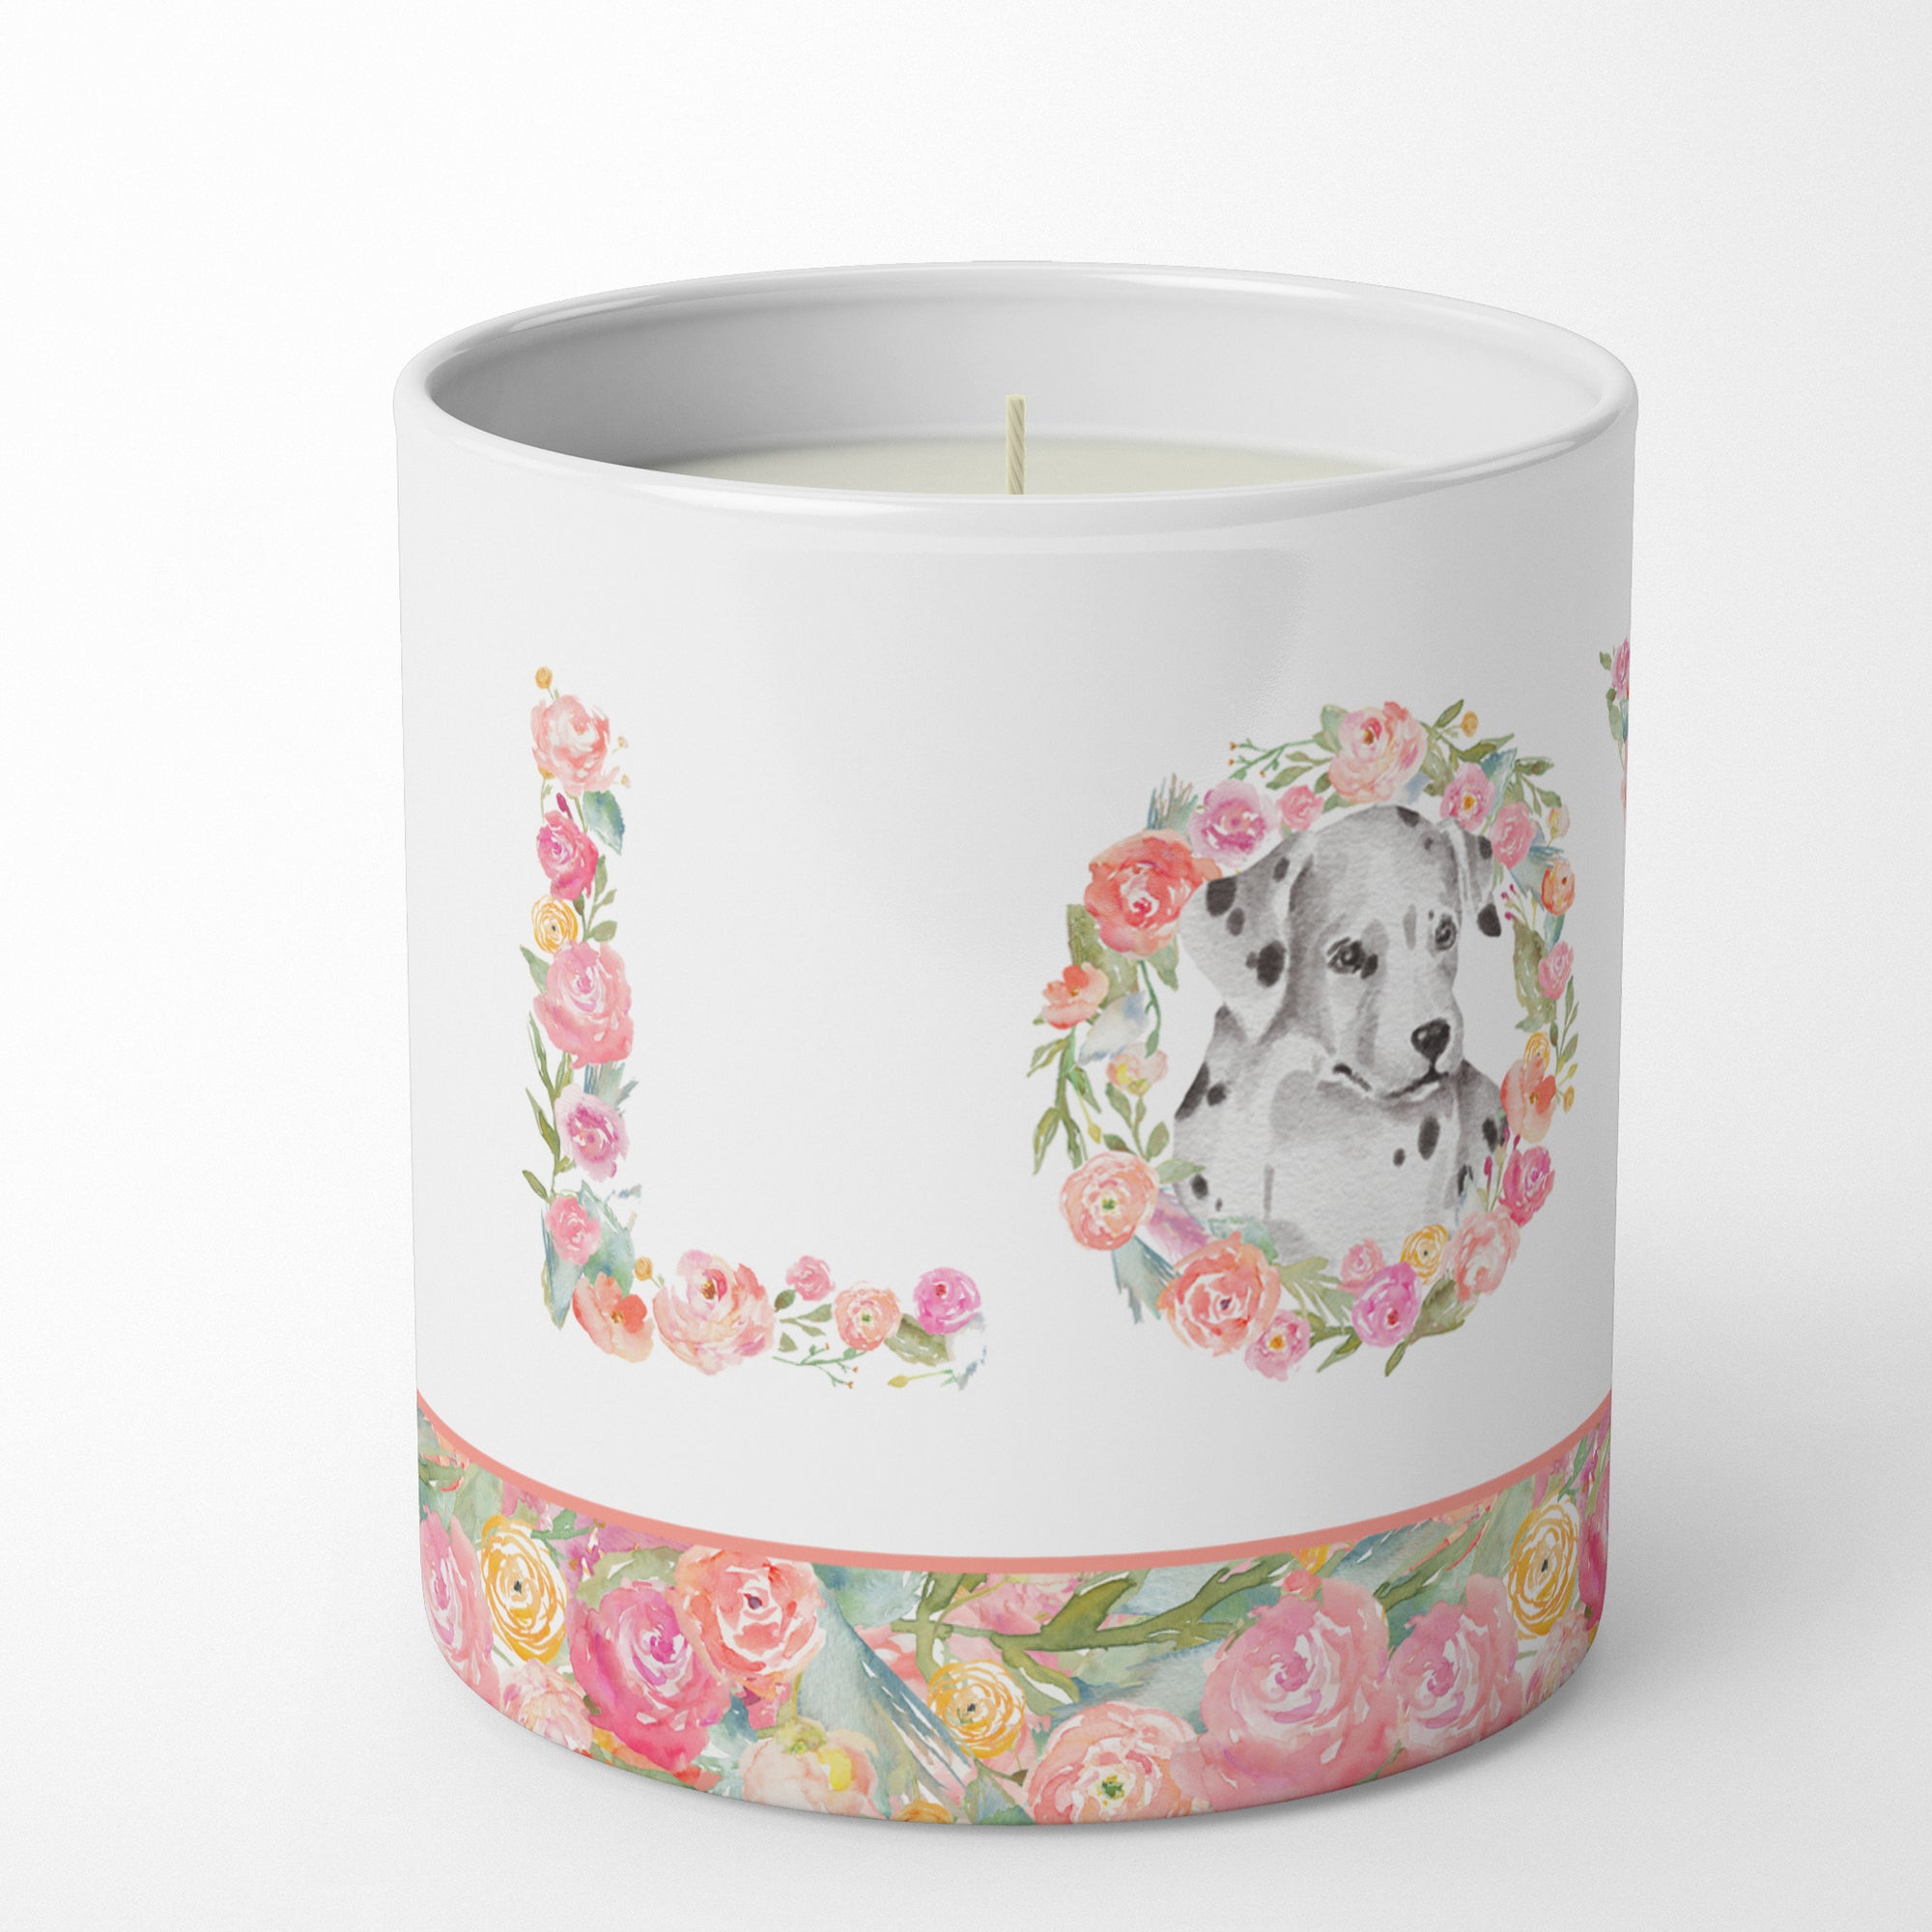 Buy this Dalmatian #2 LOVE 10 oz Decorative Soy Candle